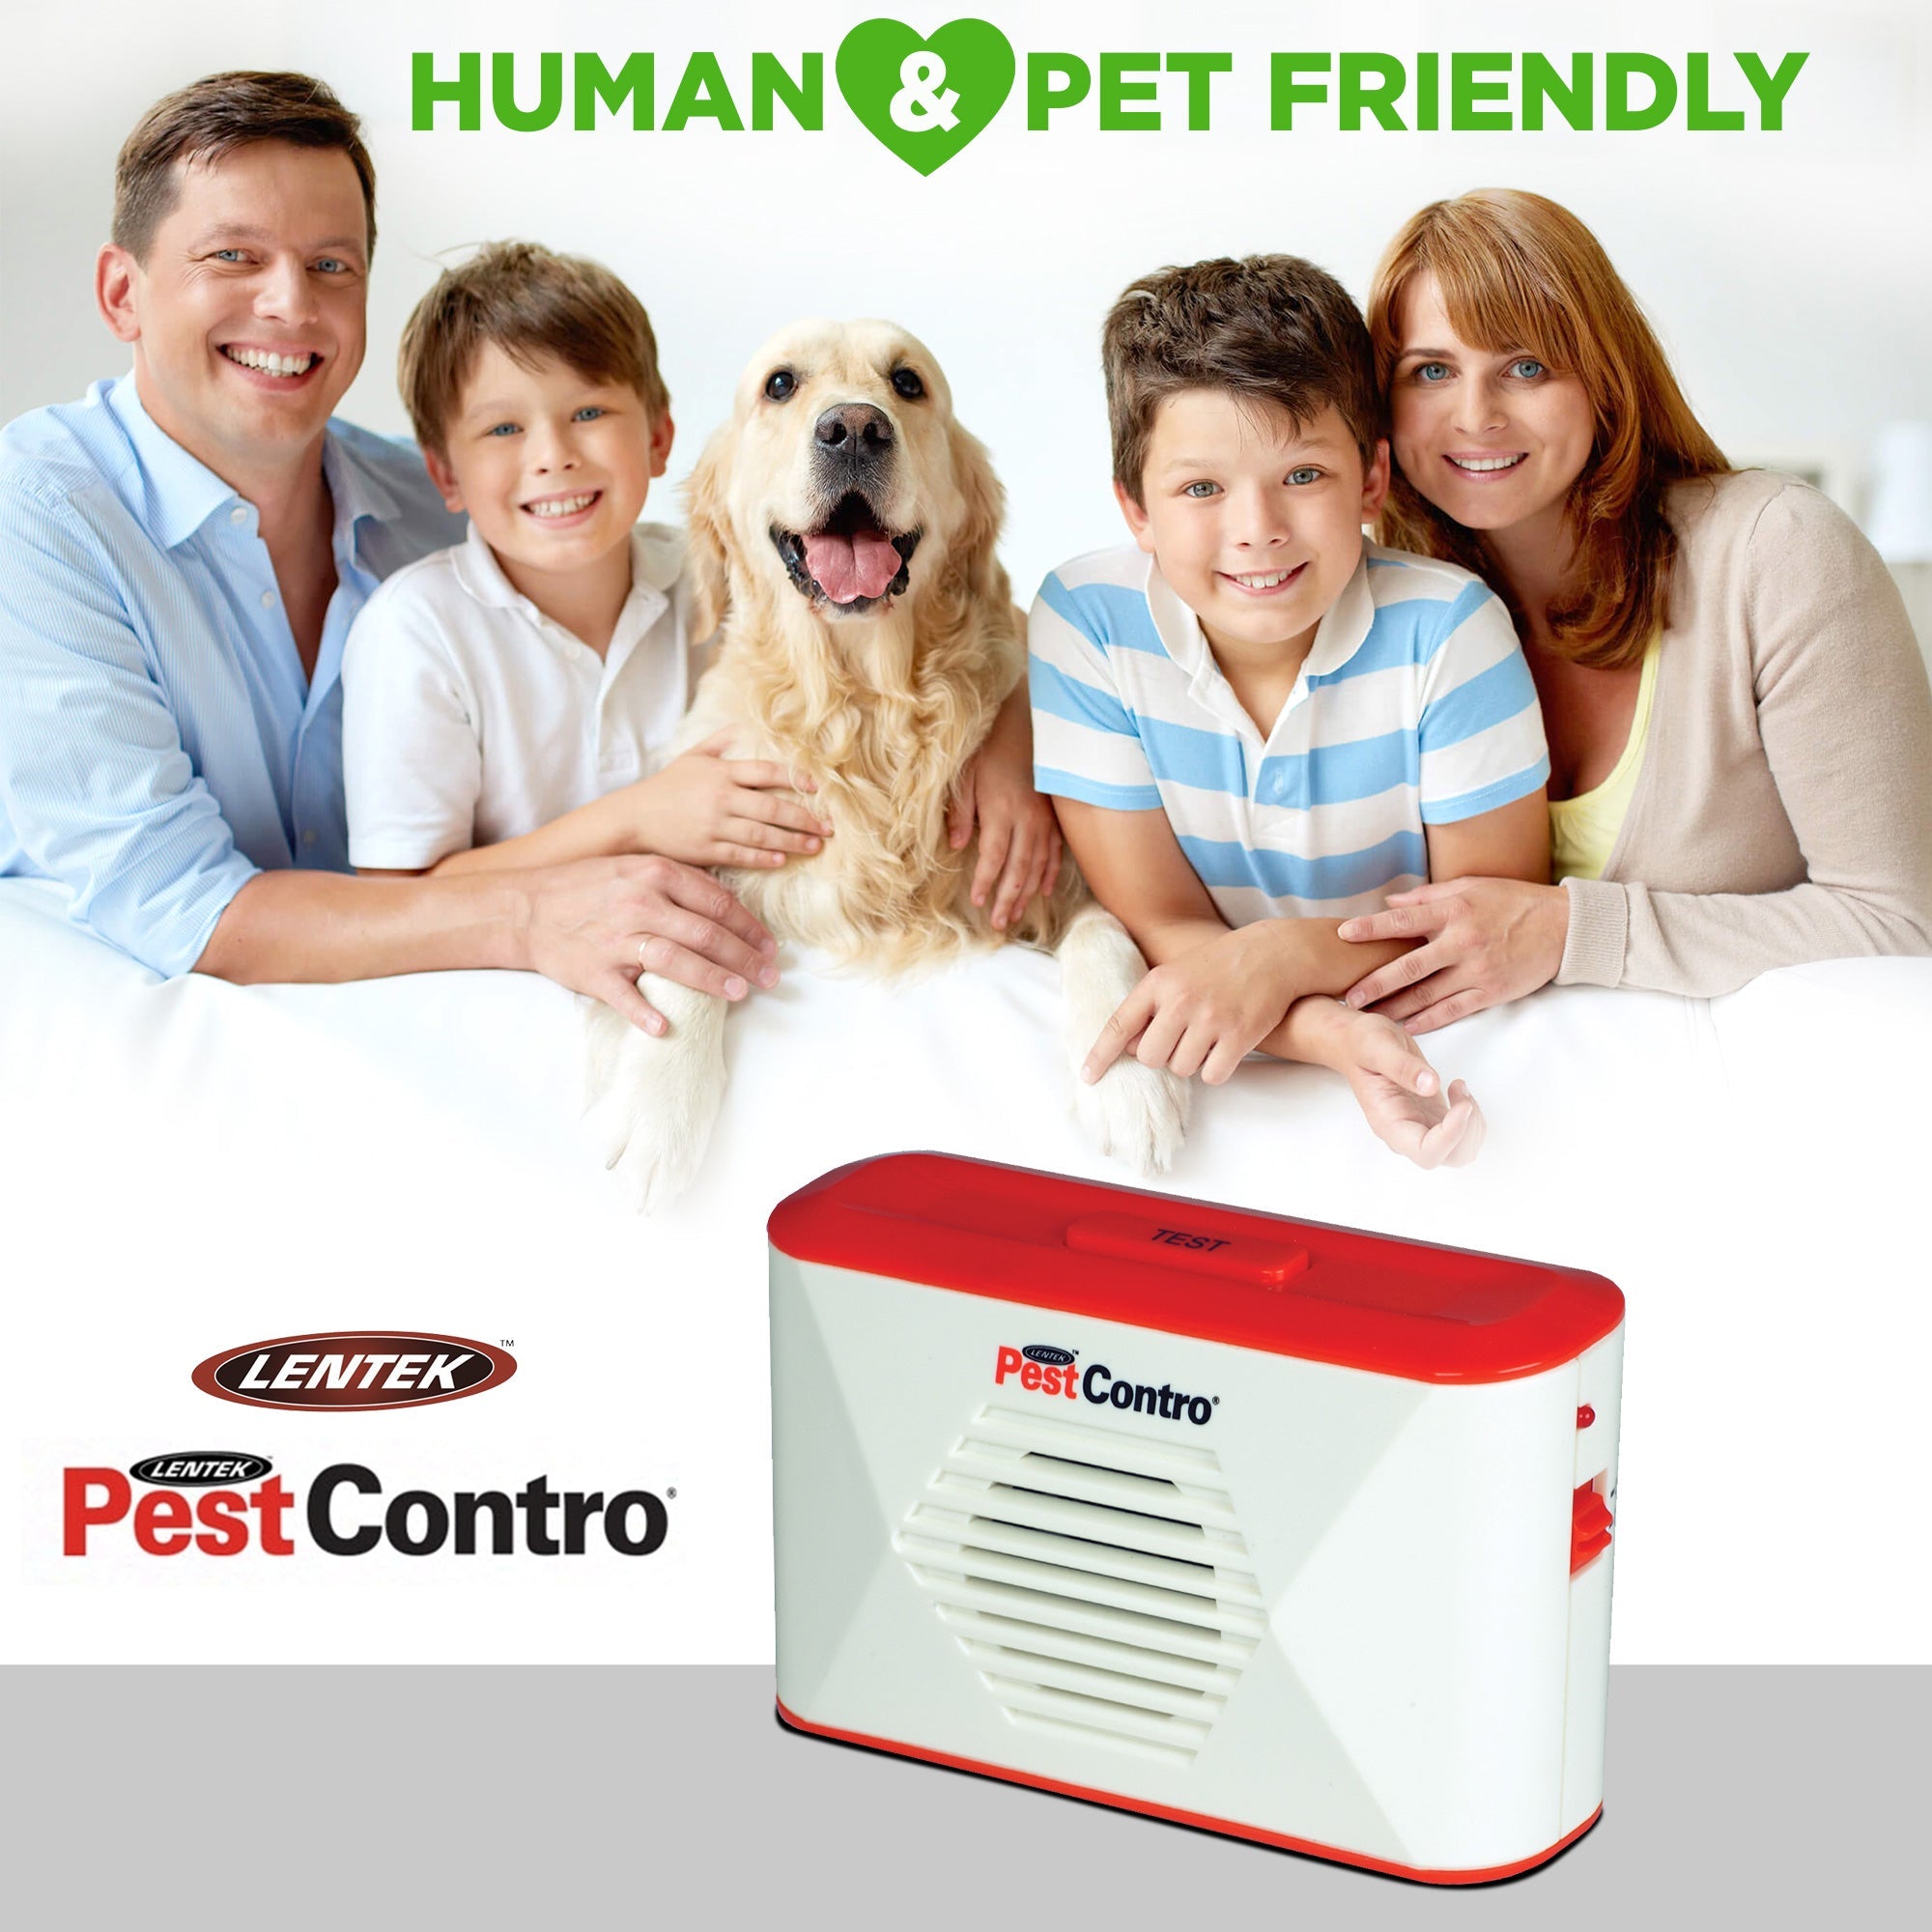 Product shot of PestContro portable ultrasonic rodent repeller in the foreground with a lifestyle image of two adults, two children, and a golden retriever in the background. Text at the top reads, "Human and pet friendly"